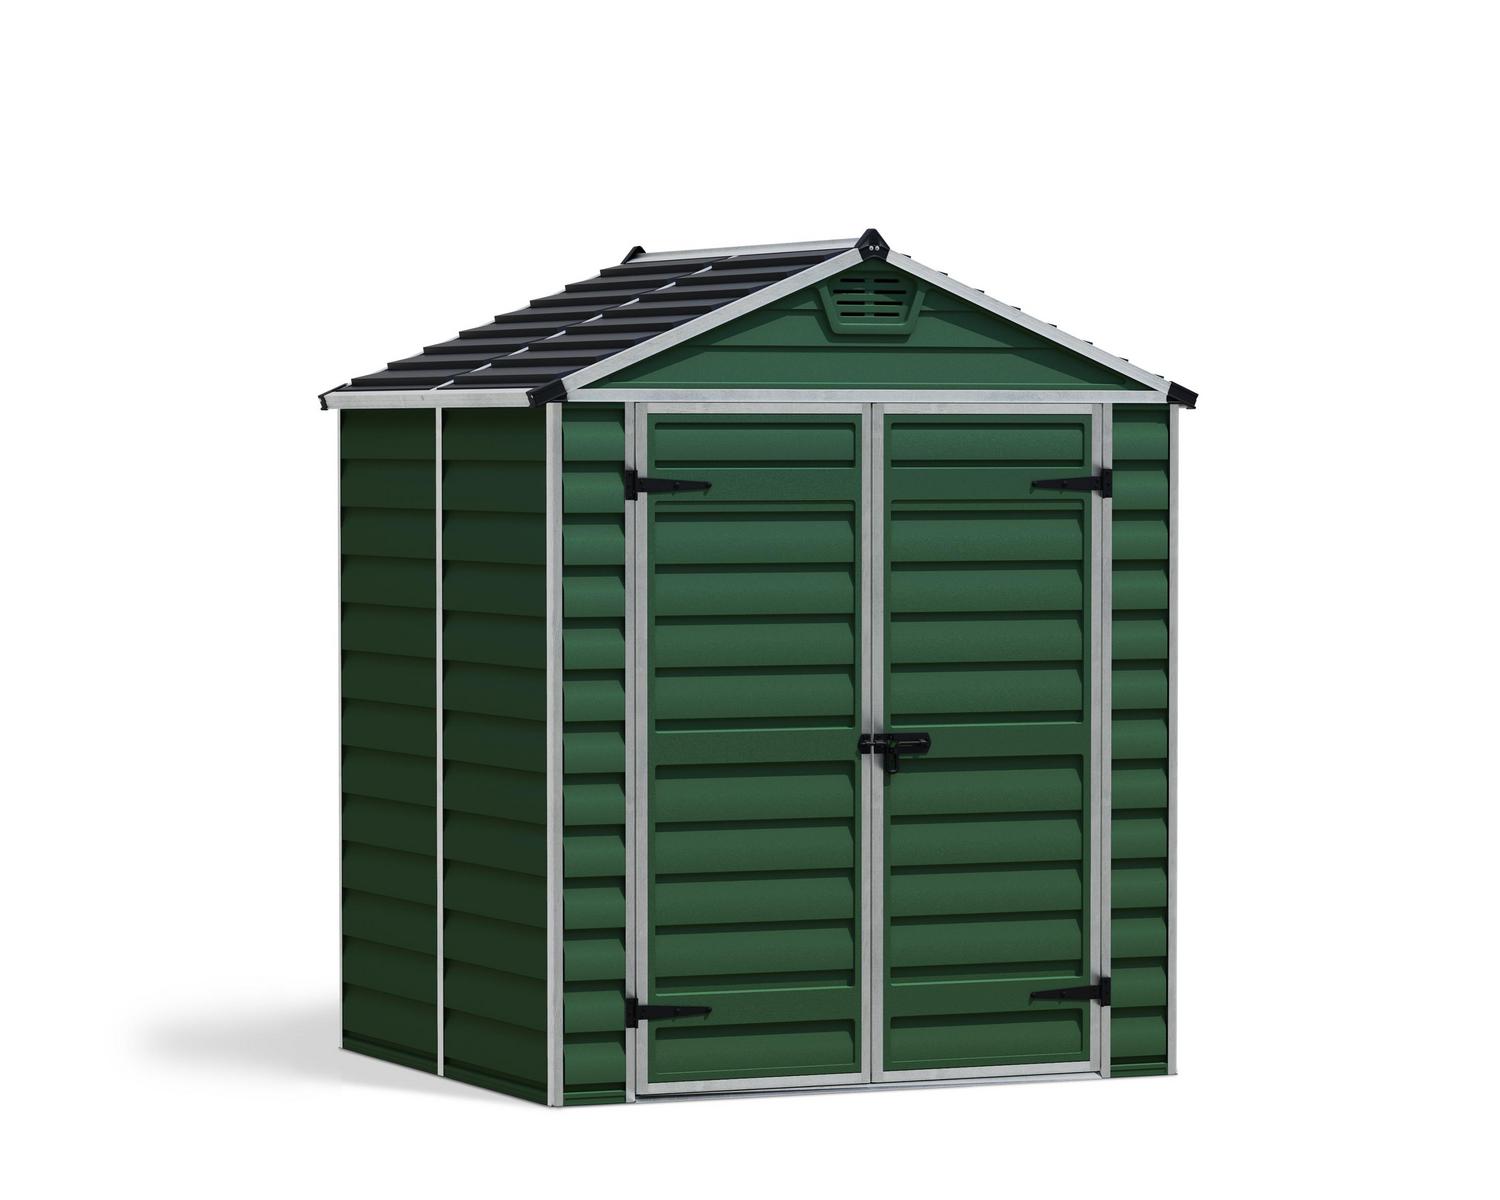 Skylight 6 ft. x 5ft. Plastic Storage Shed with Green Polycarbonate Panels & Aluminium Frame